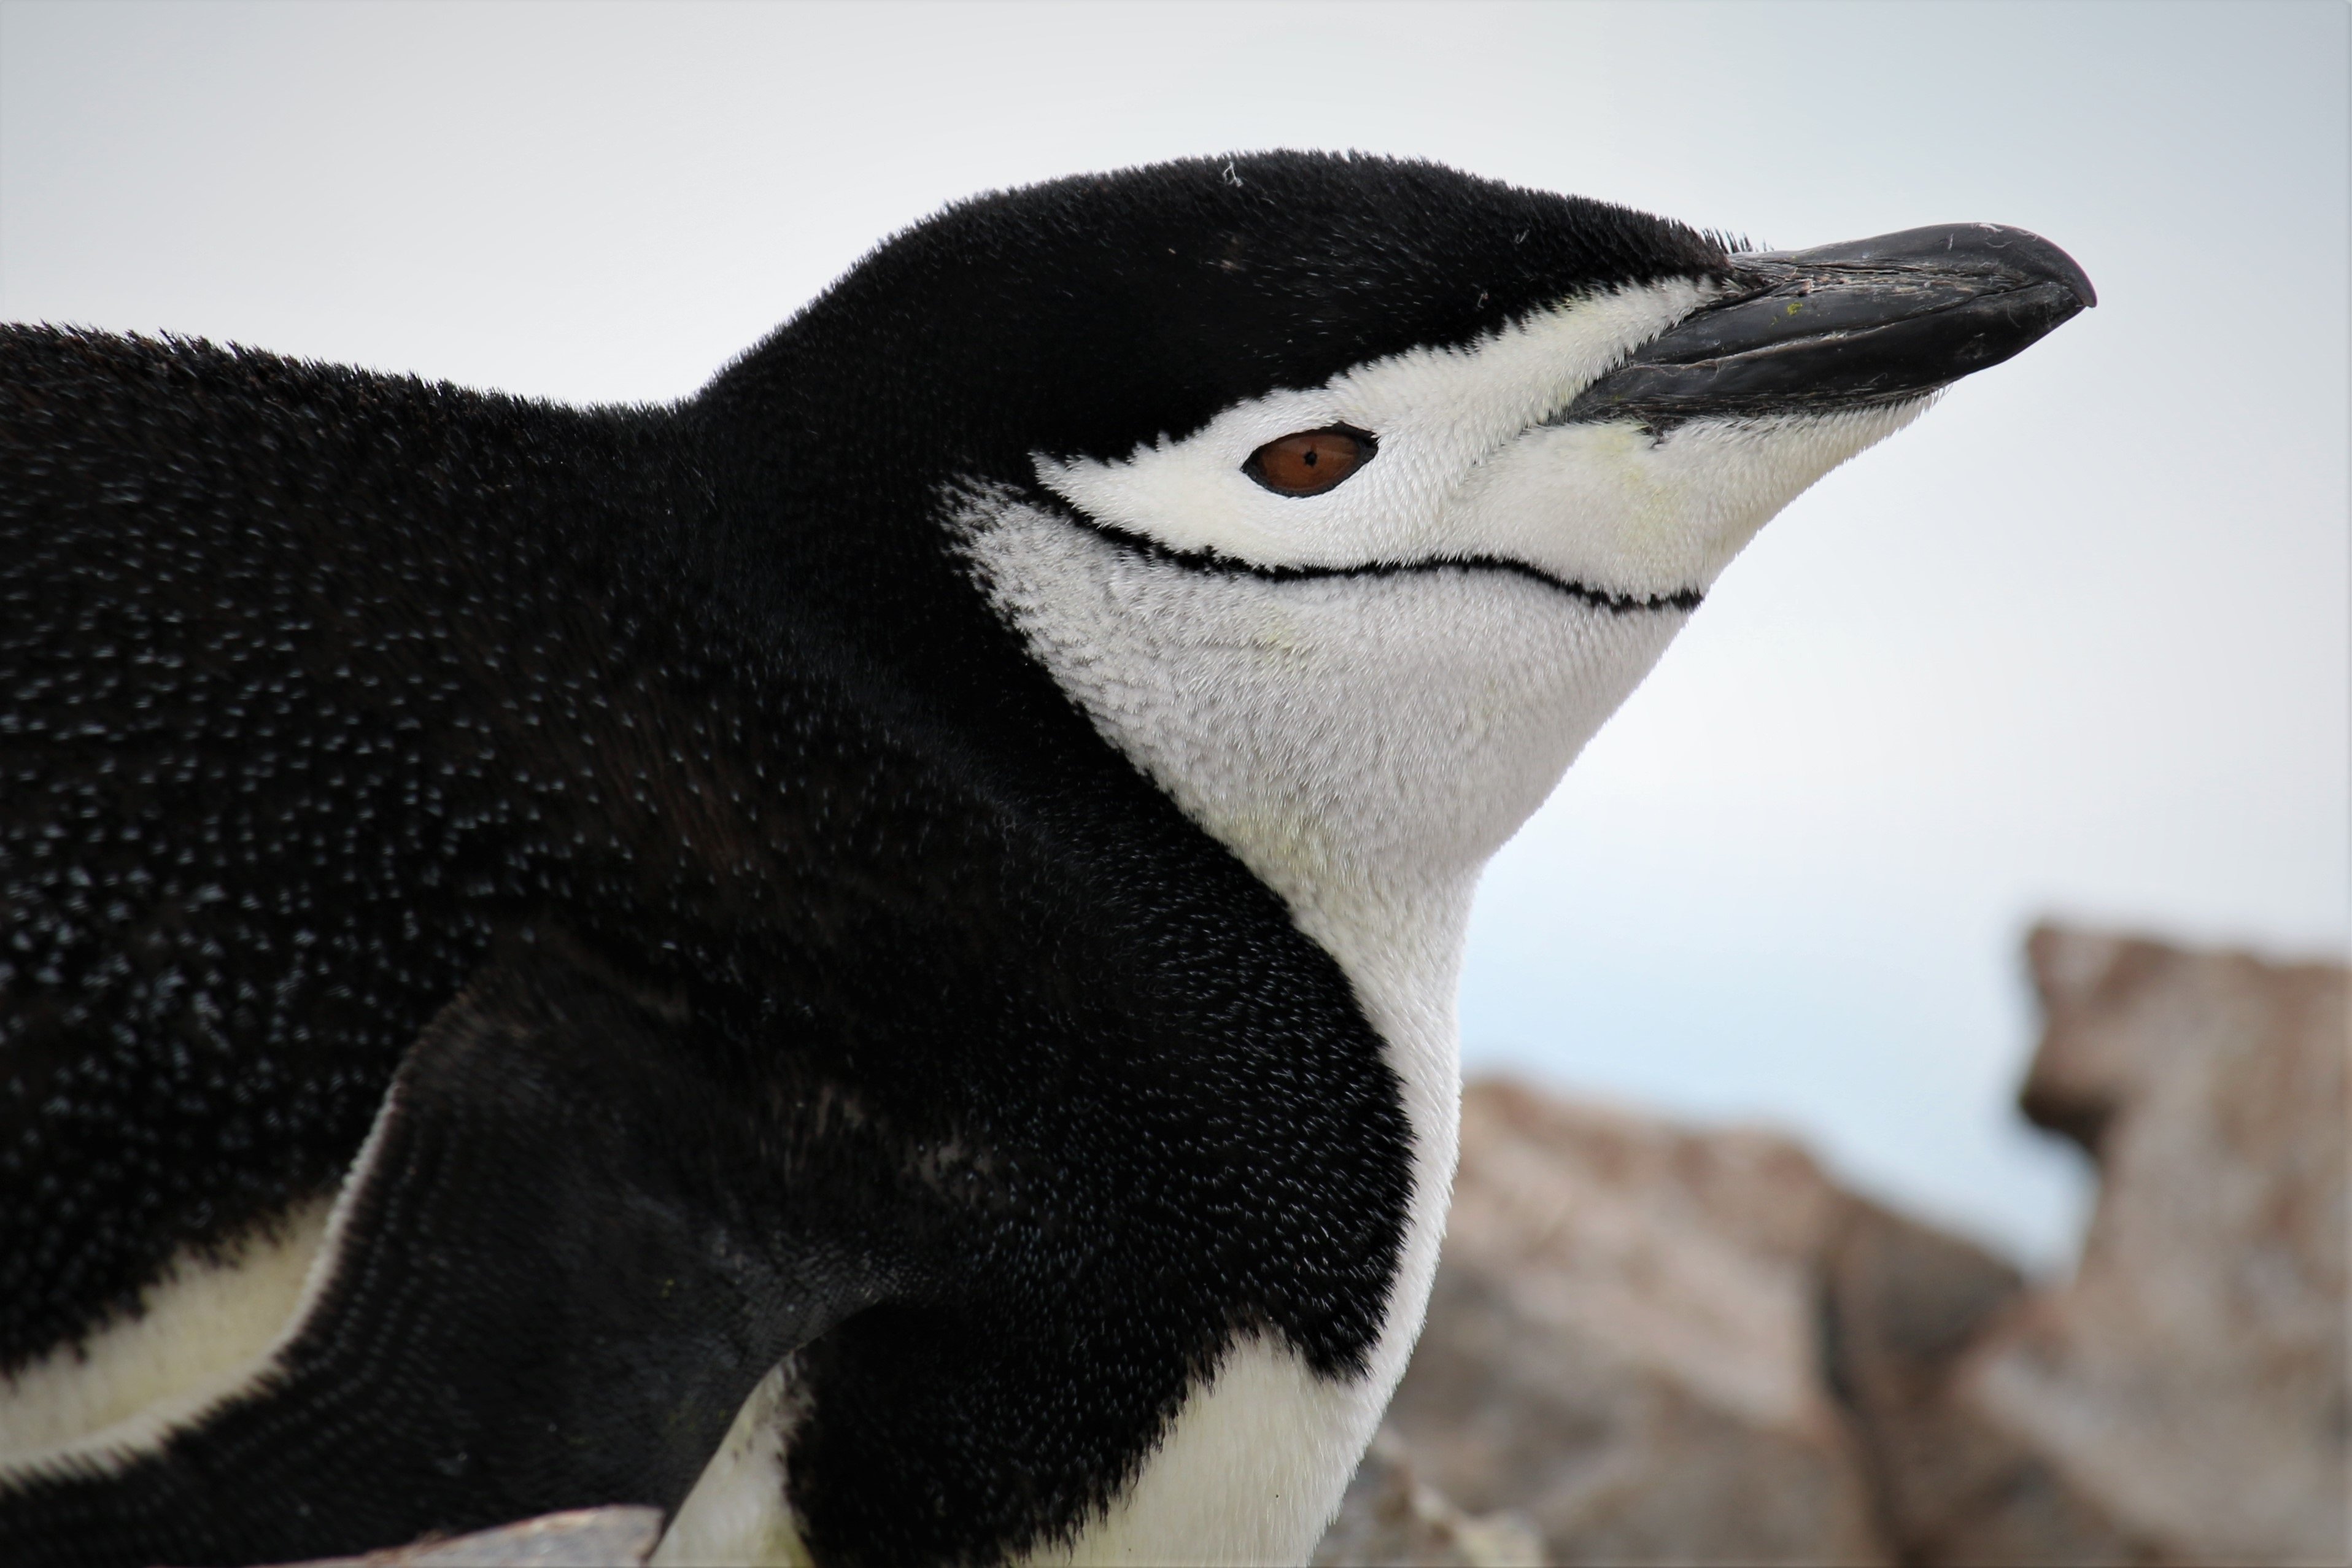 A chinstrap penguin eyes the camera from its comfortable perch atop a nest in the South Shetland Islands. Photo: Dr. Mike Polito